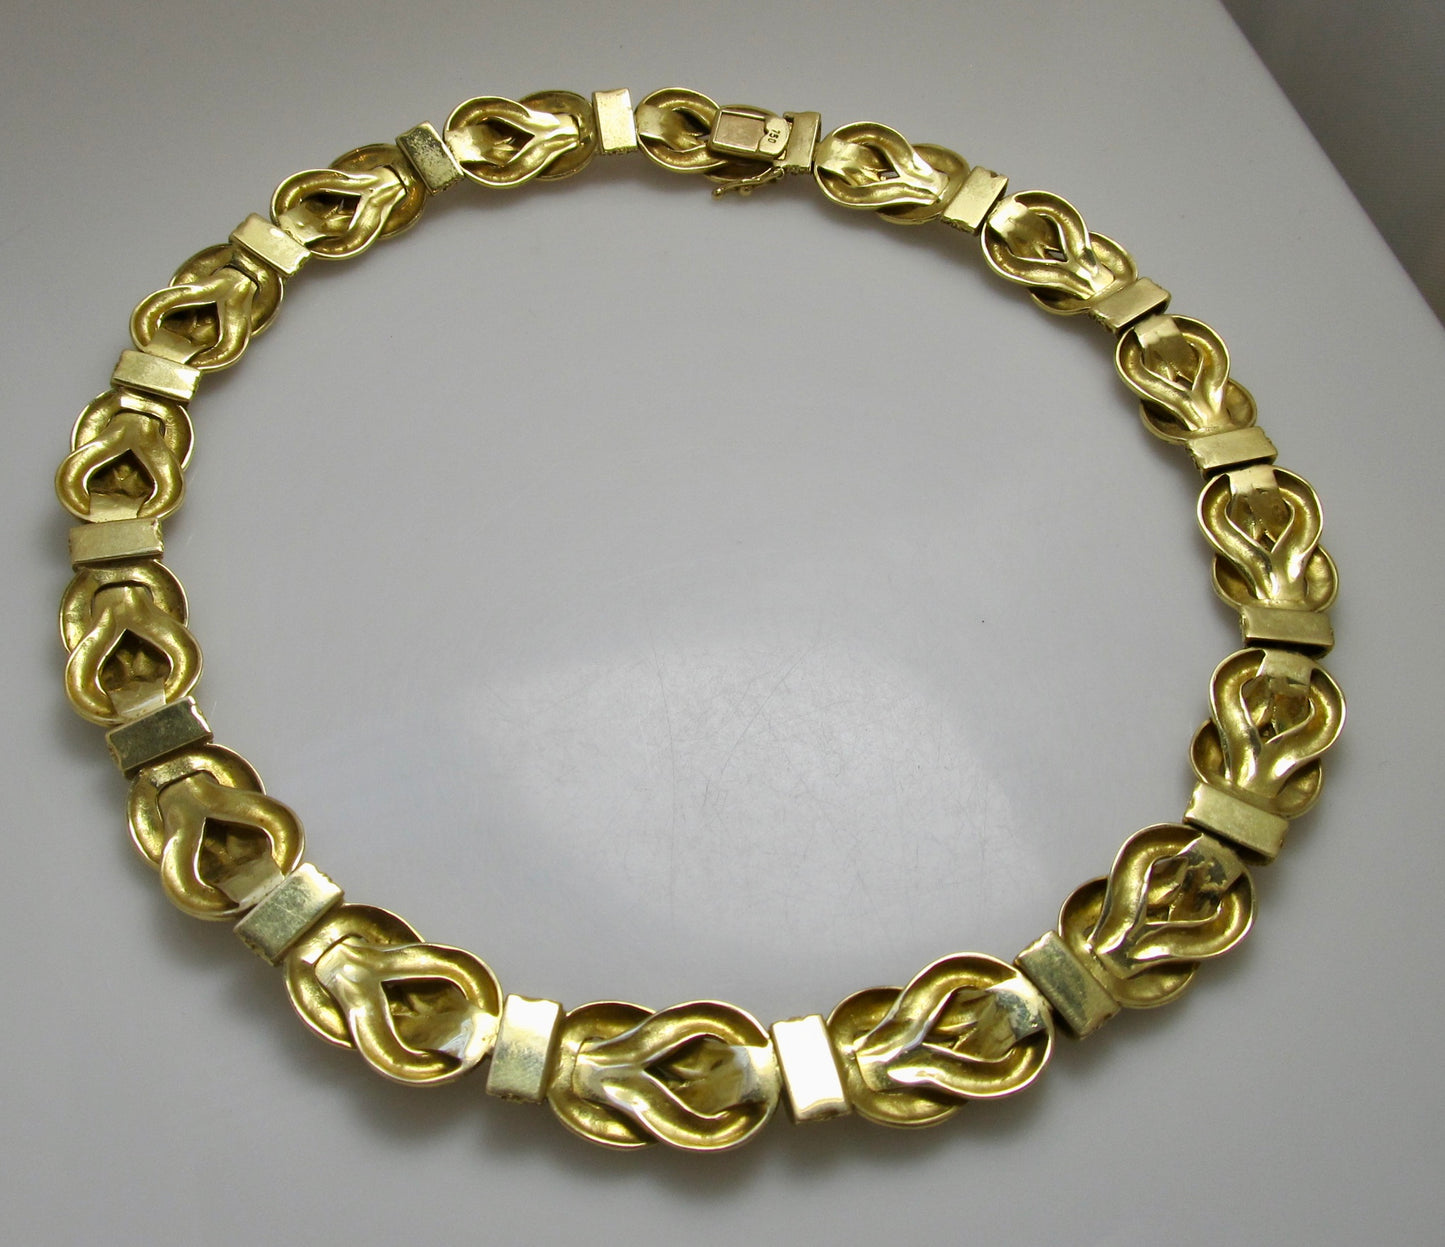 18k yellow gold statement necklace